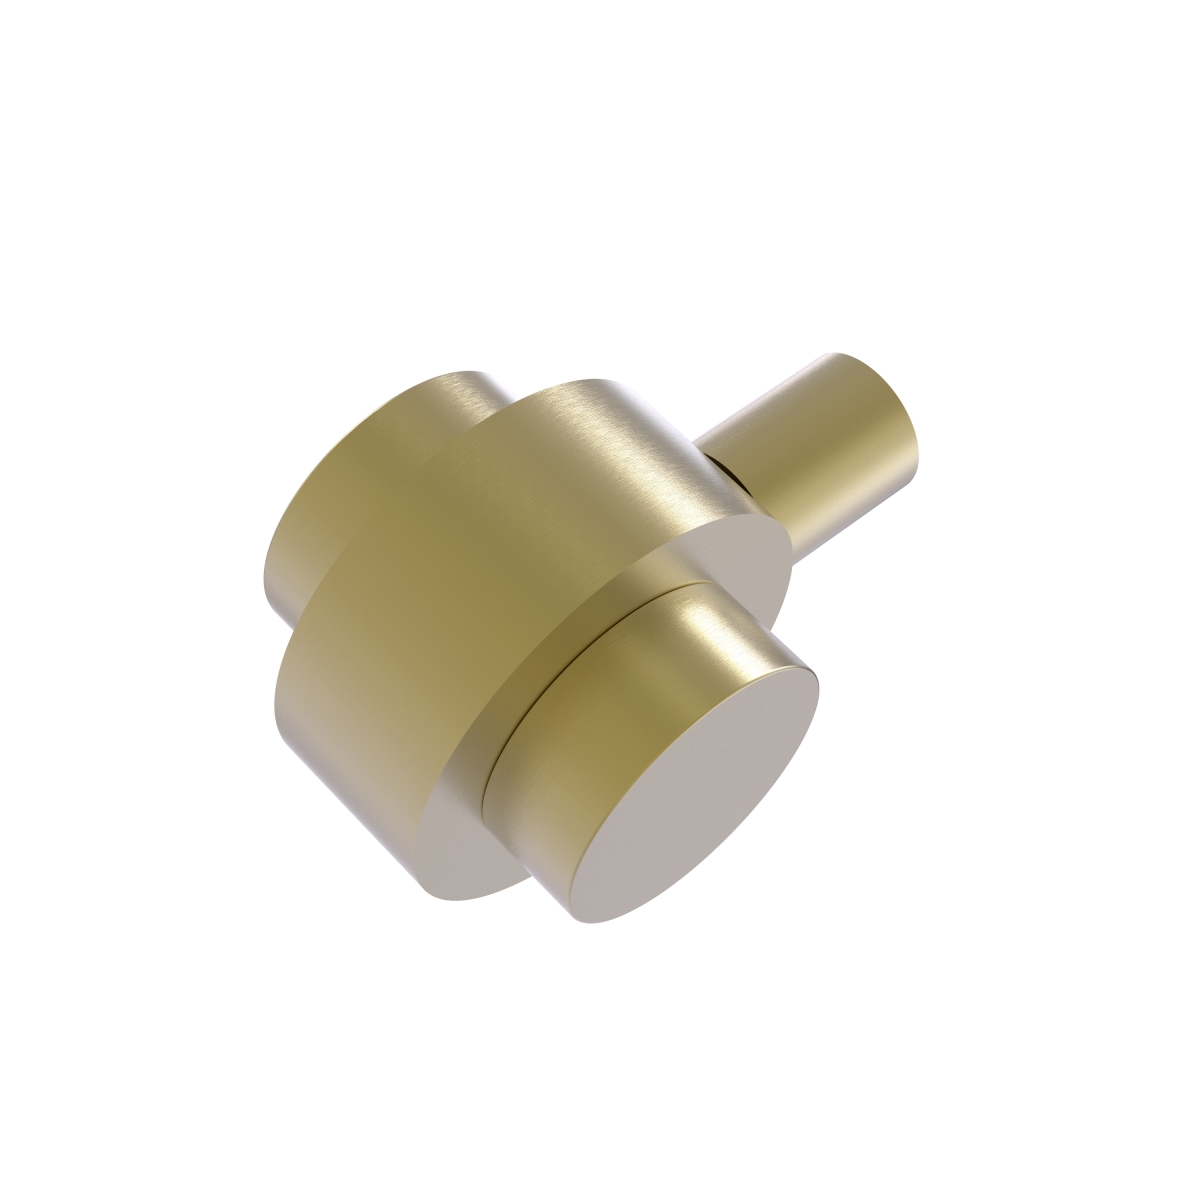 102-sbr 1.5 X 1.5 X 1.5 In. Cabinet Knob With Smooth Ring, Satin Brass